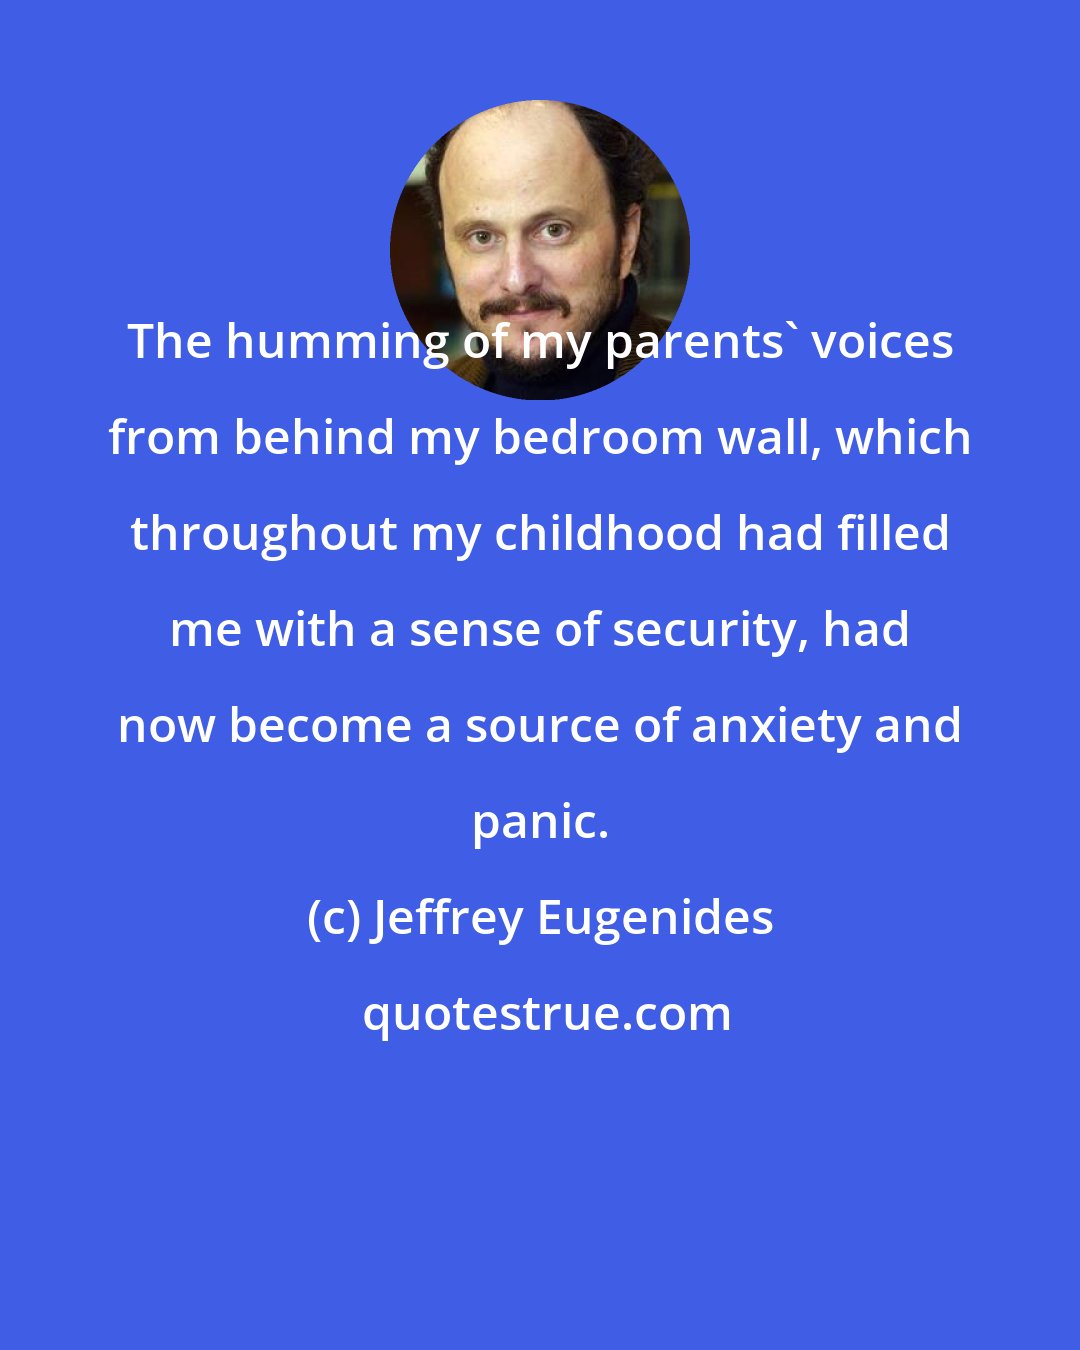 Jeffrey Eugenides: The humming of my parents' voices from behind my bedroom wall, which throughout my childhood had filled me with a sense of security, had now become a source of anxiety and panic.